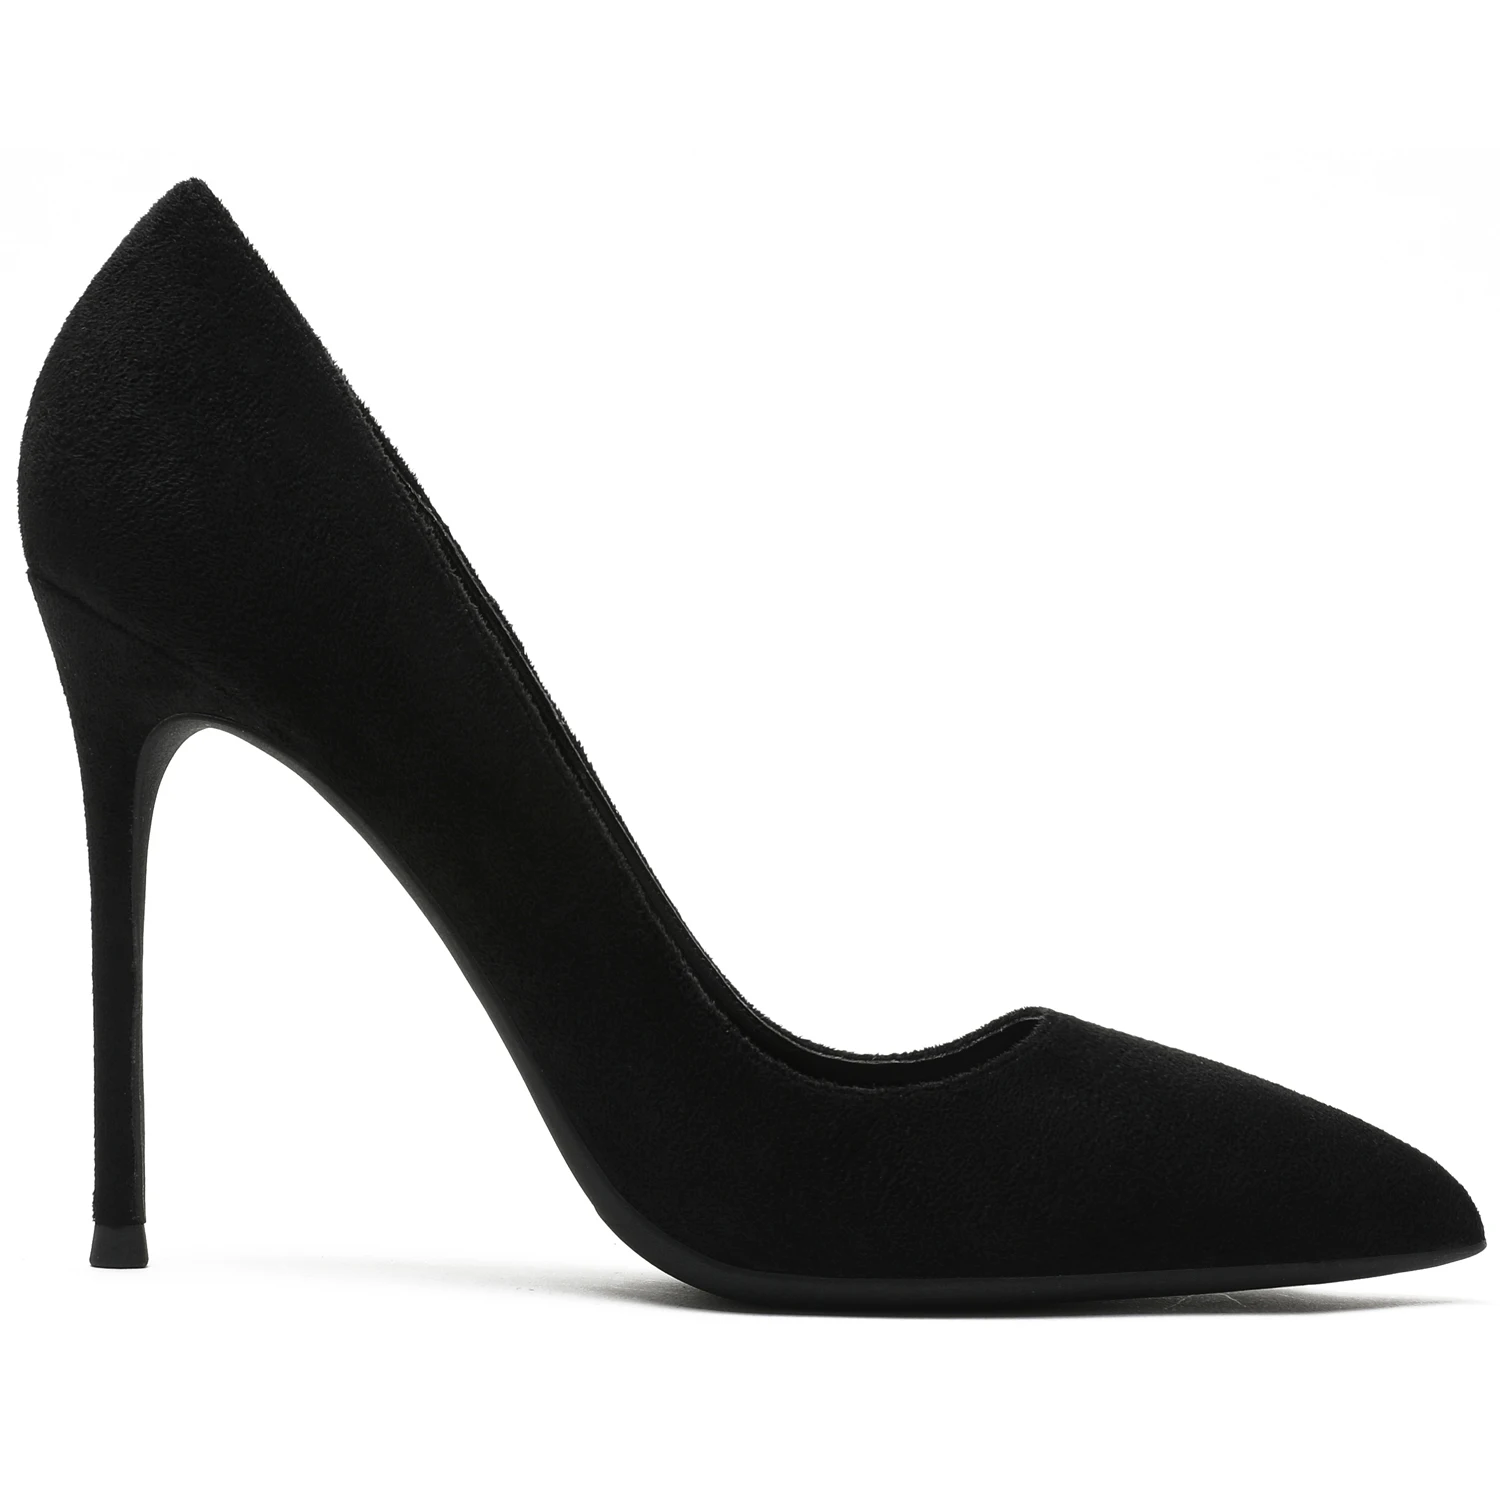 

【Measure your feet length before order】Suede Women Stiletto High Heel Pumps Pointed Toe Sexy Runway Fetish Dress Shoes 22-CHC-33